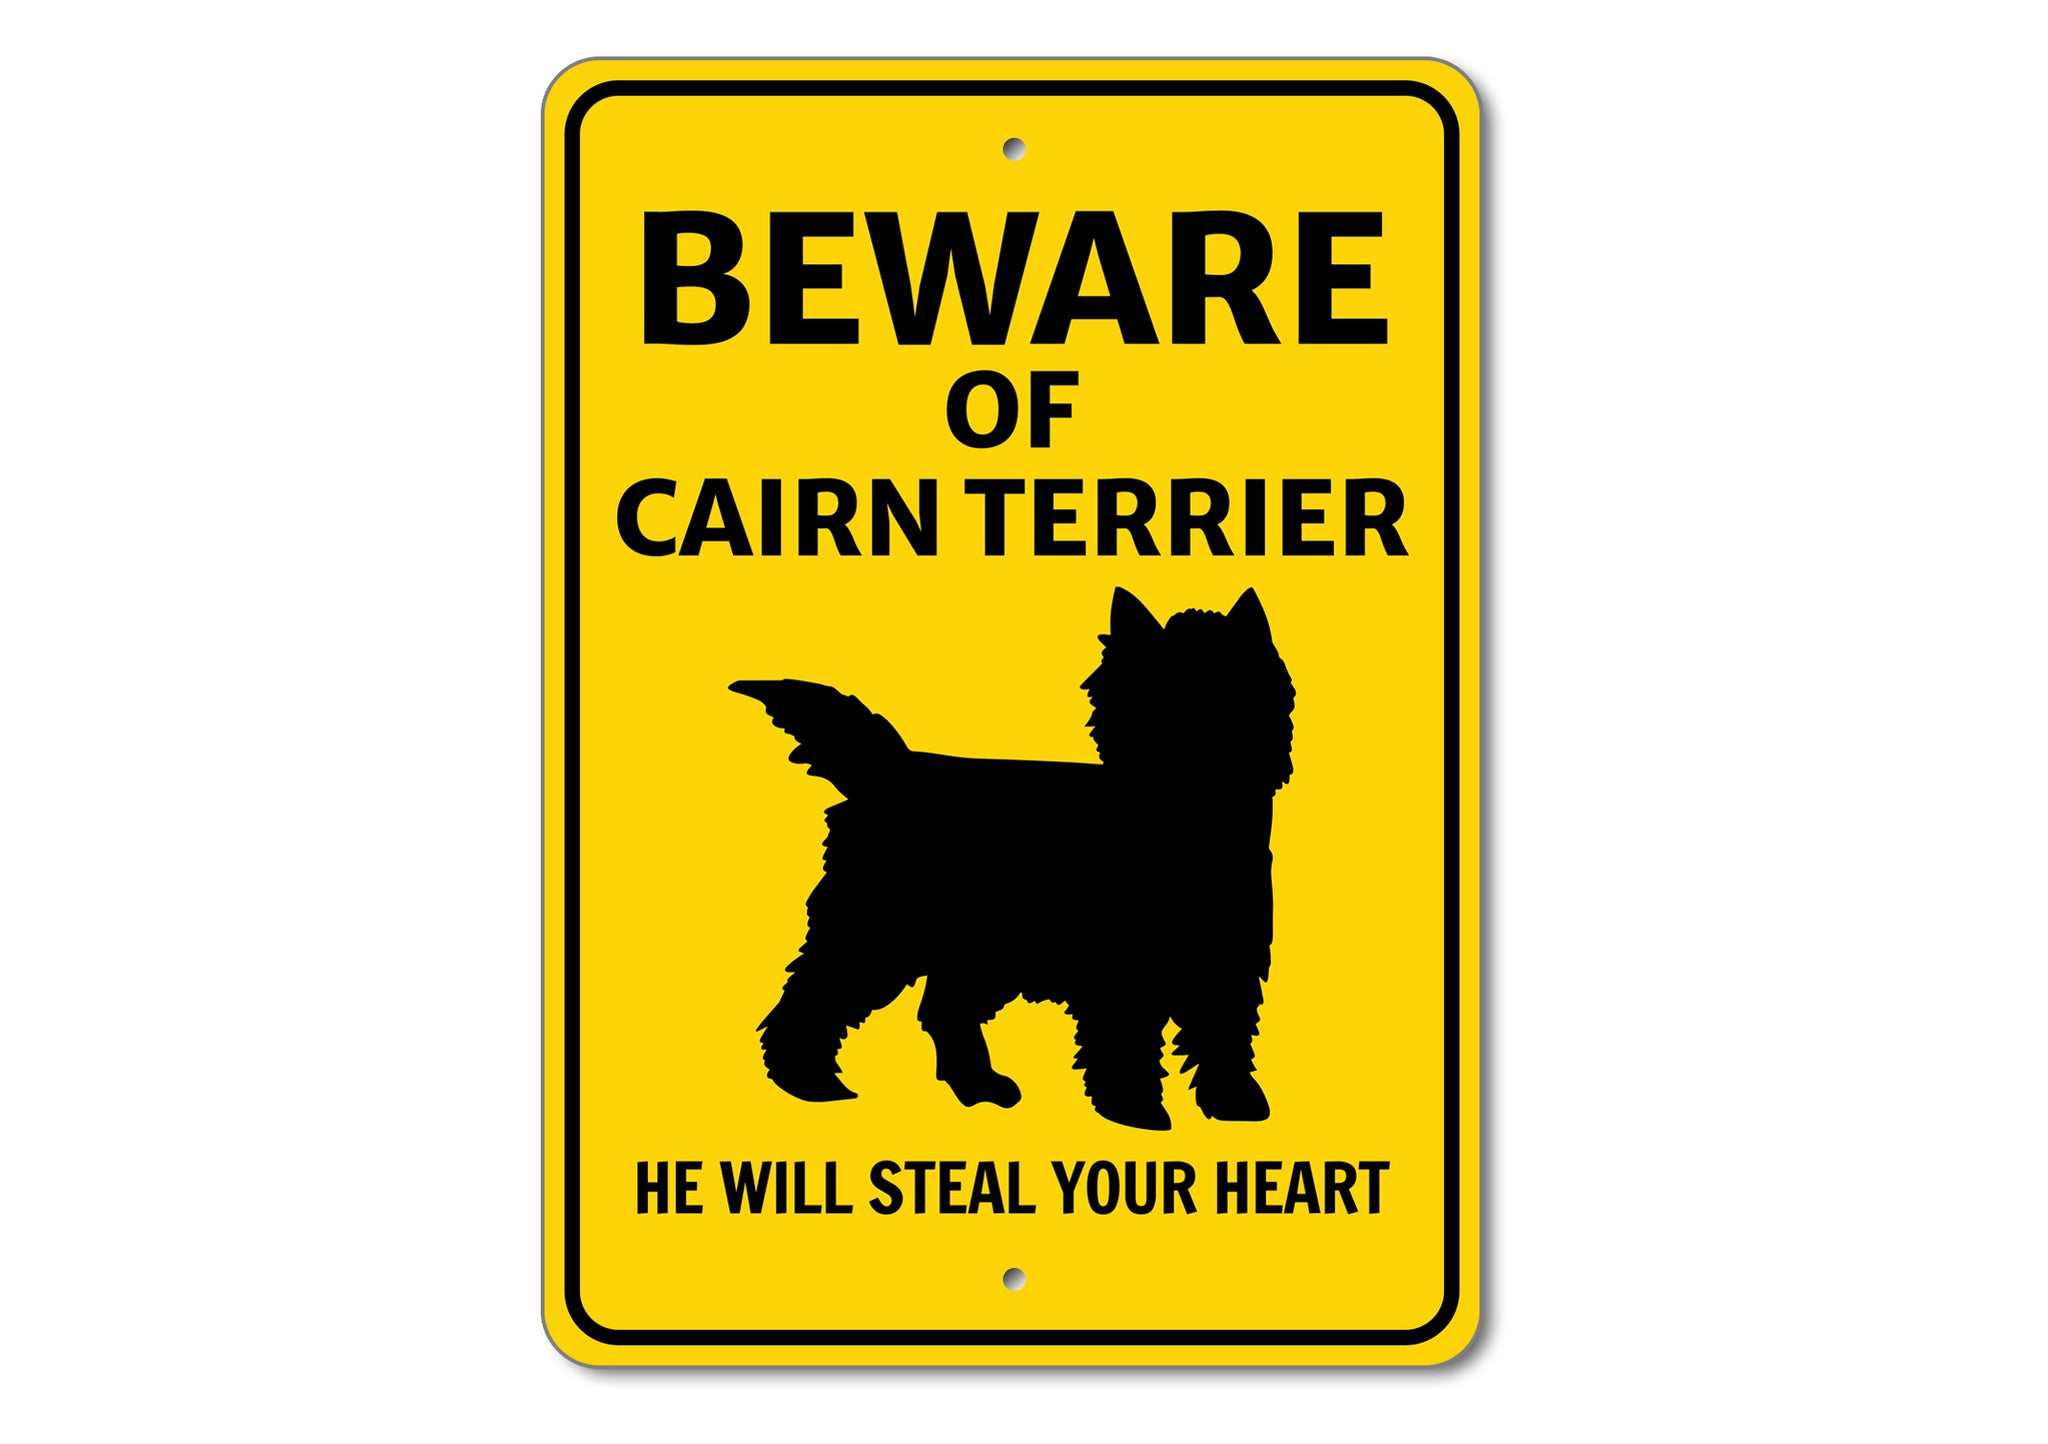 Beware He Will Steal Your Heart K9 Sign - Dog Names Starting with "C"